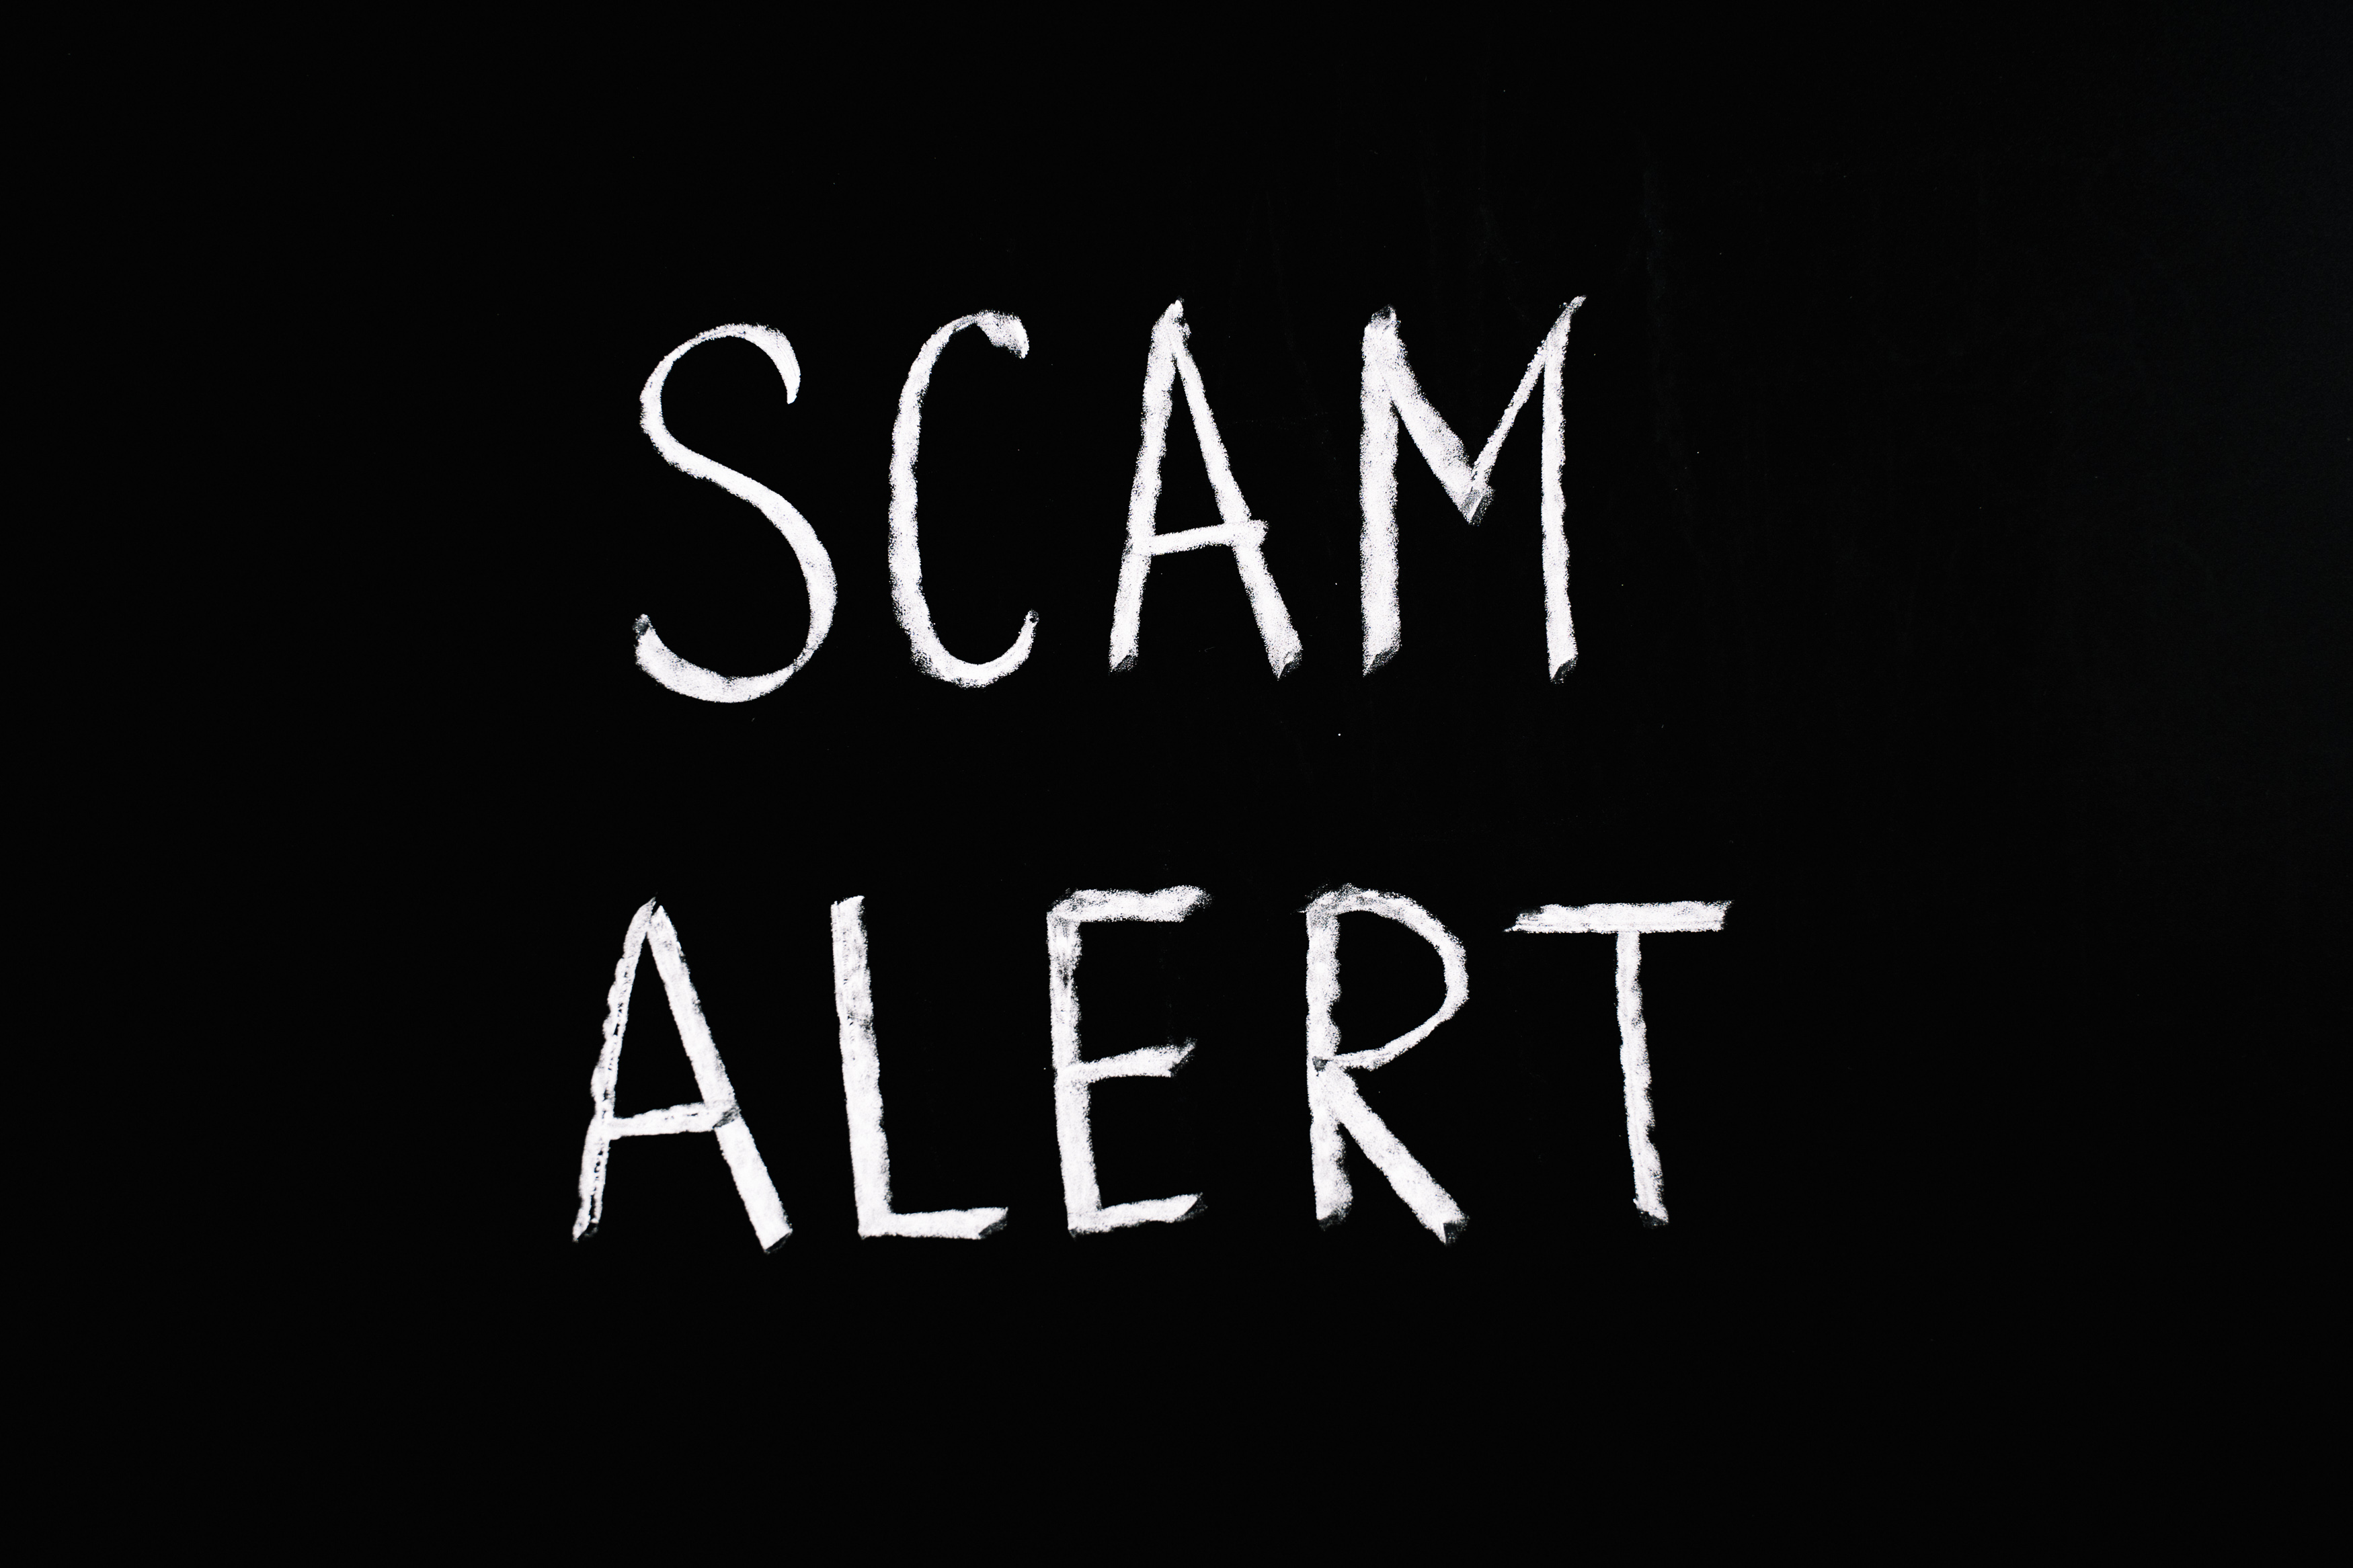 Scam Alert Letting Text on Black Background · Free